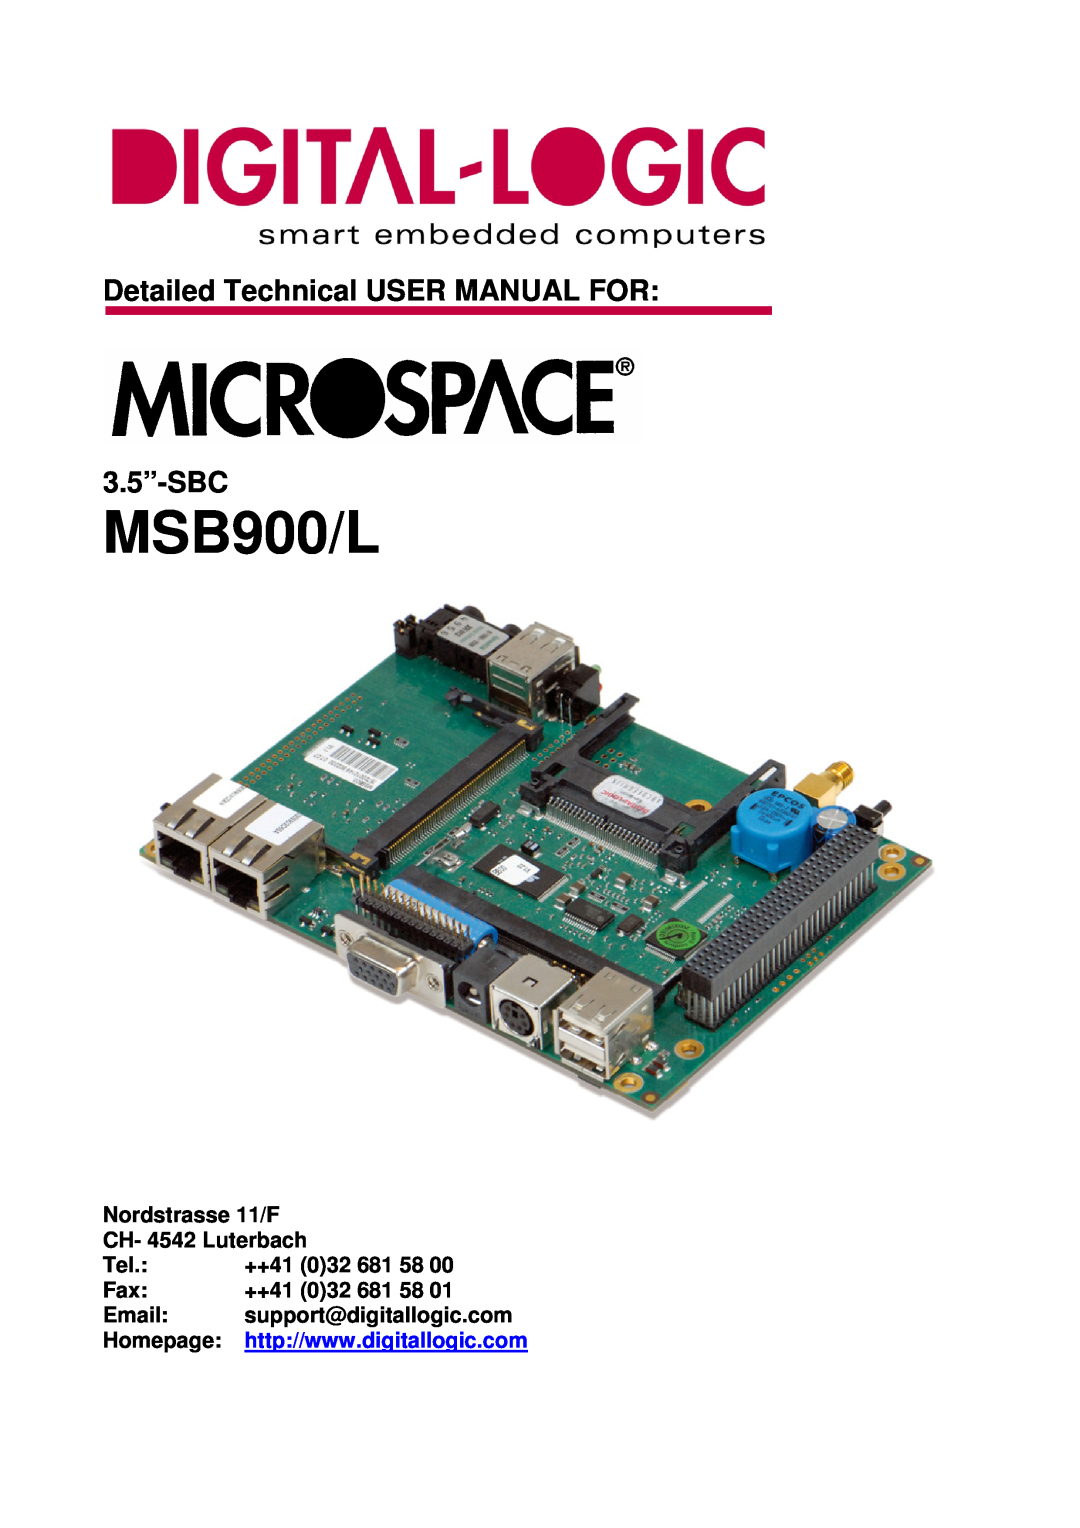 Compaq MSB900 user manual Nordstrasse 11/F CH- 4542 Luterbach, ++41 032 681 58, Email, support@digitallogic.com, Homepage 